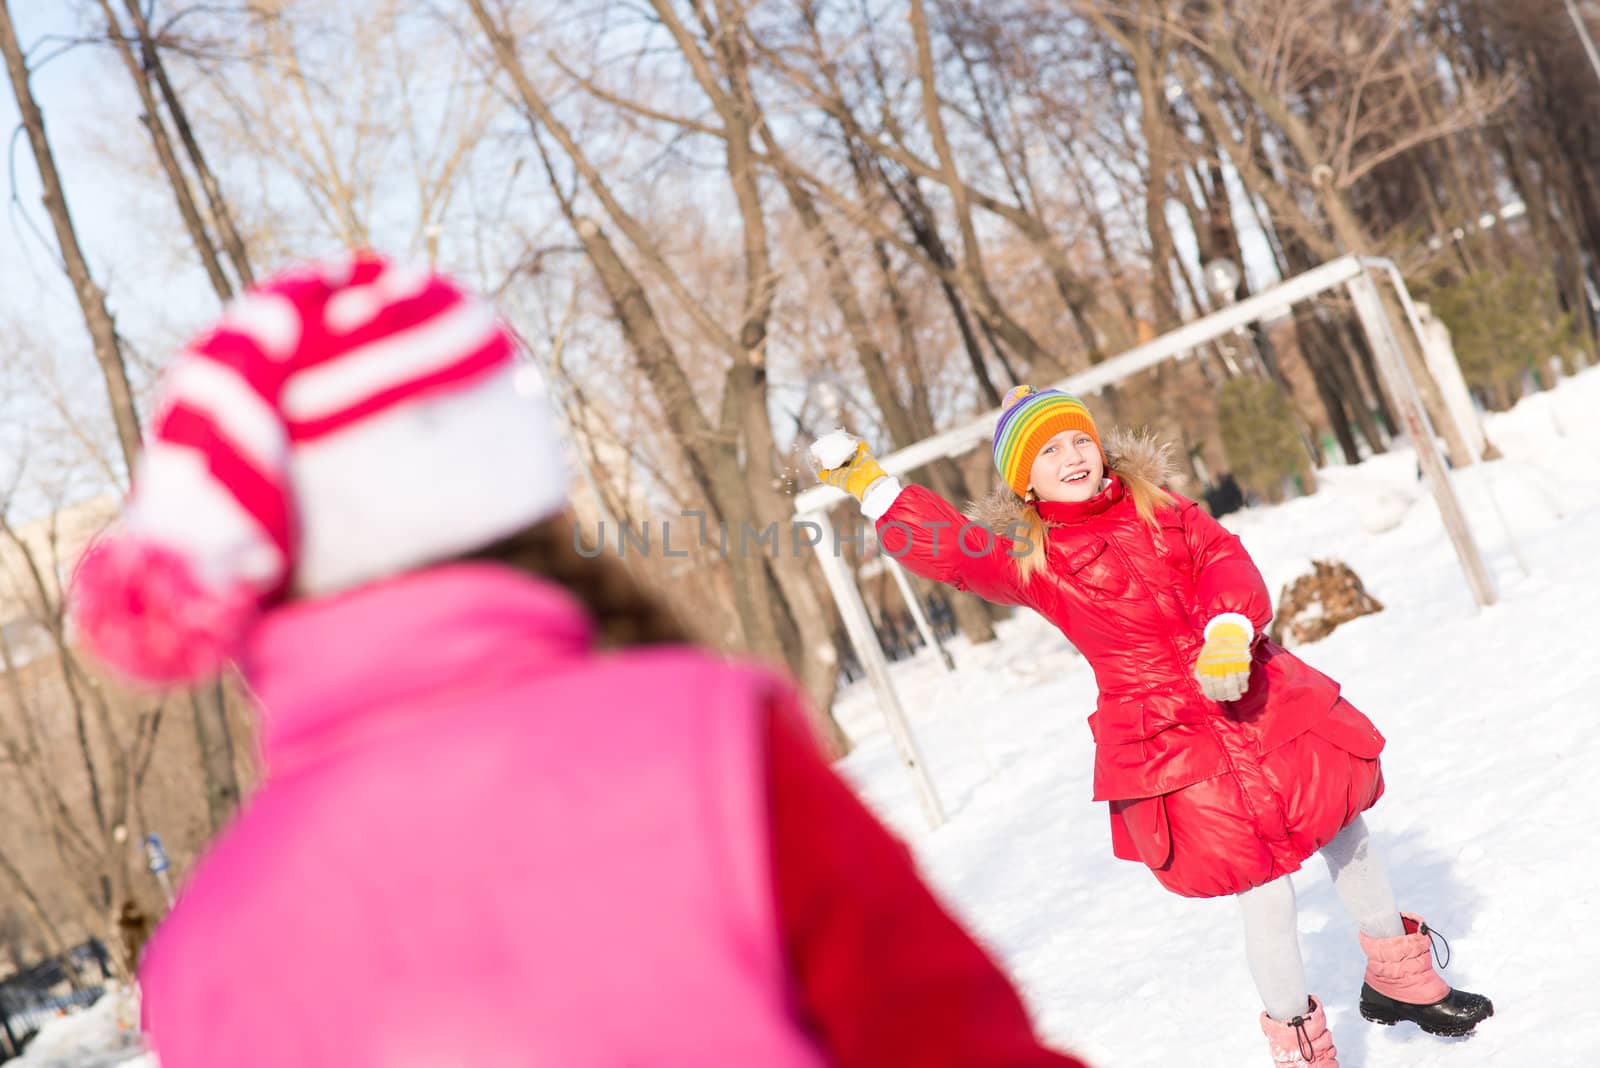 Children in Winter Park playing snowballs, actively spending time outdoors